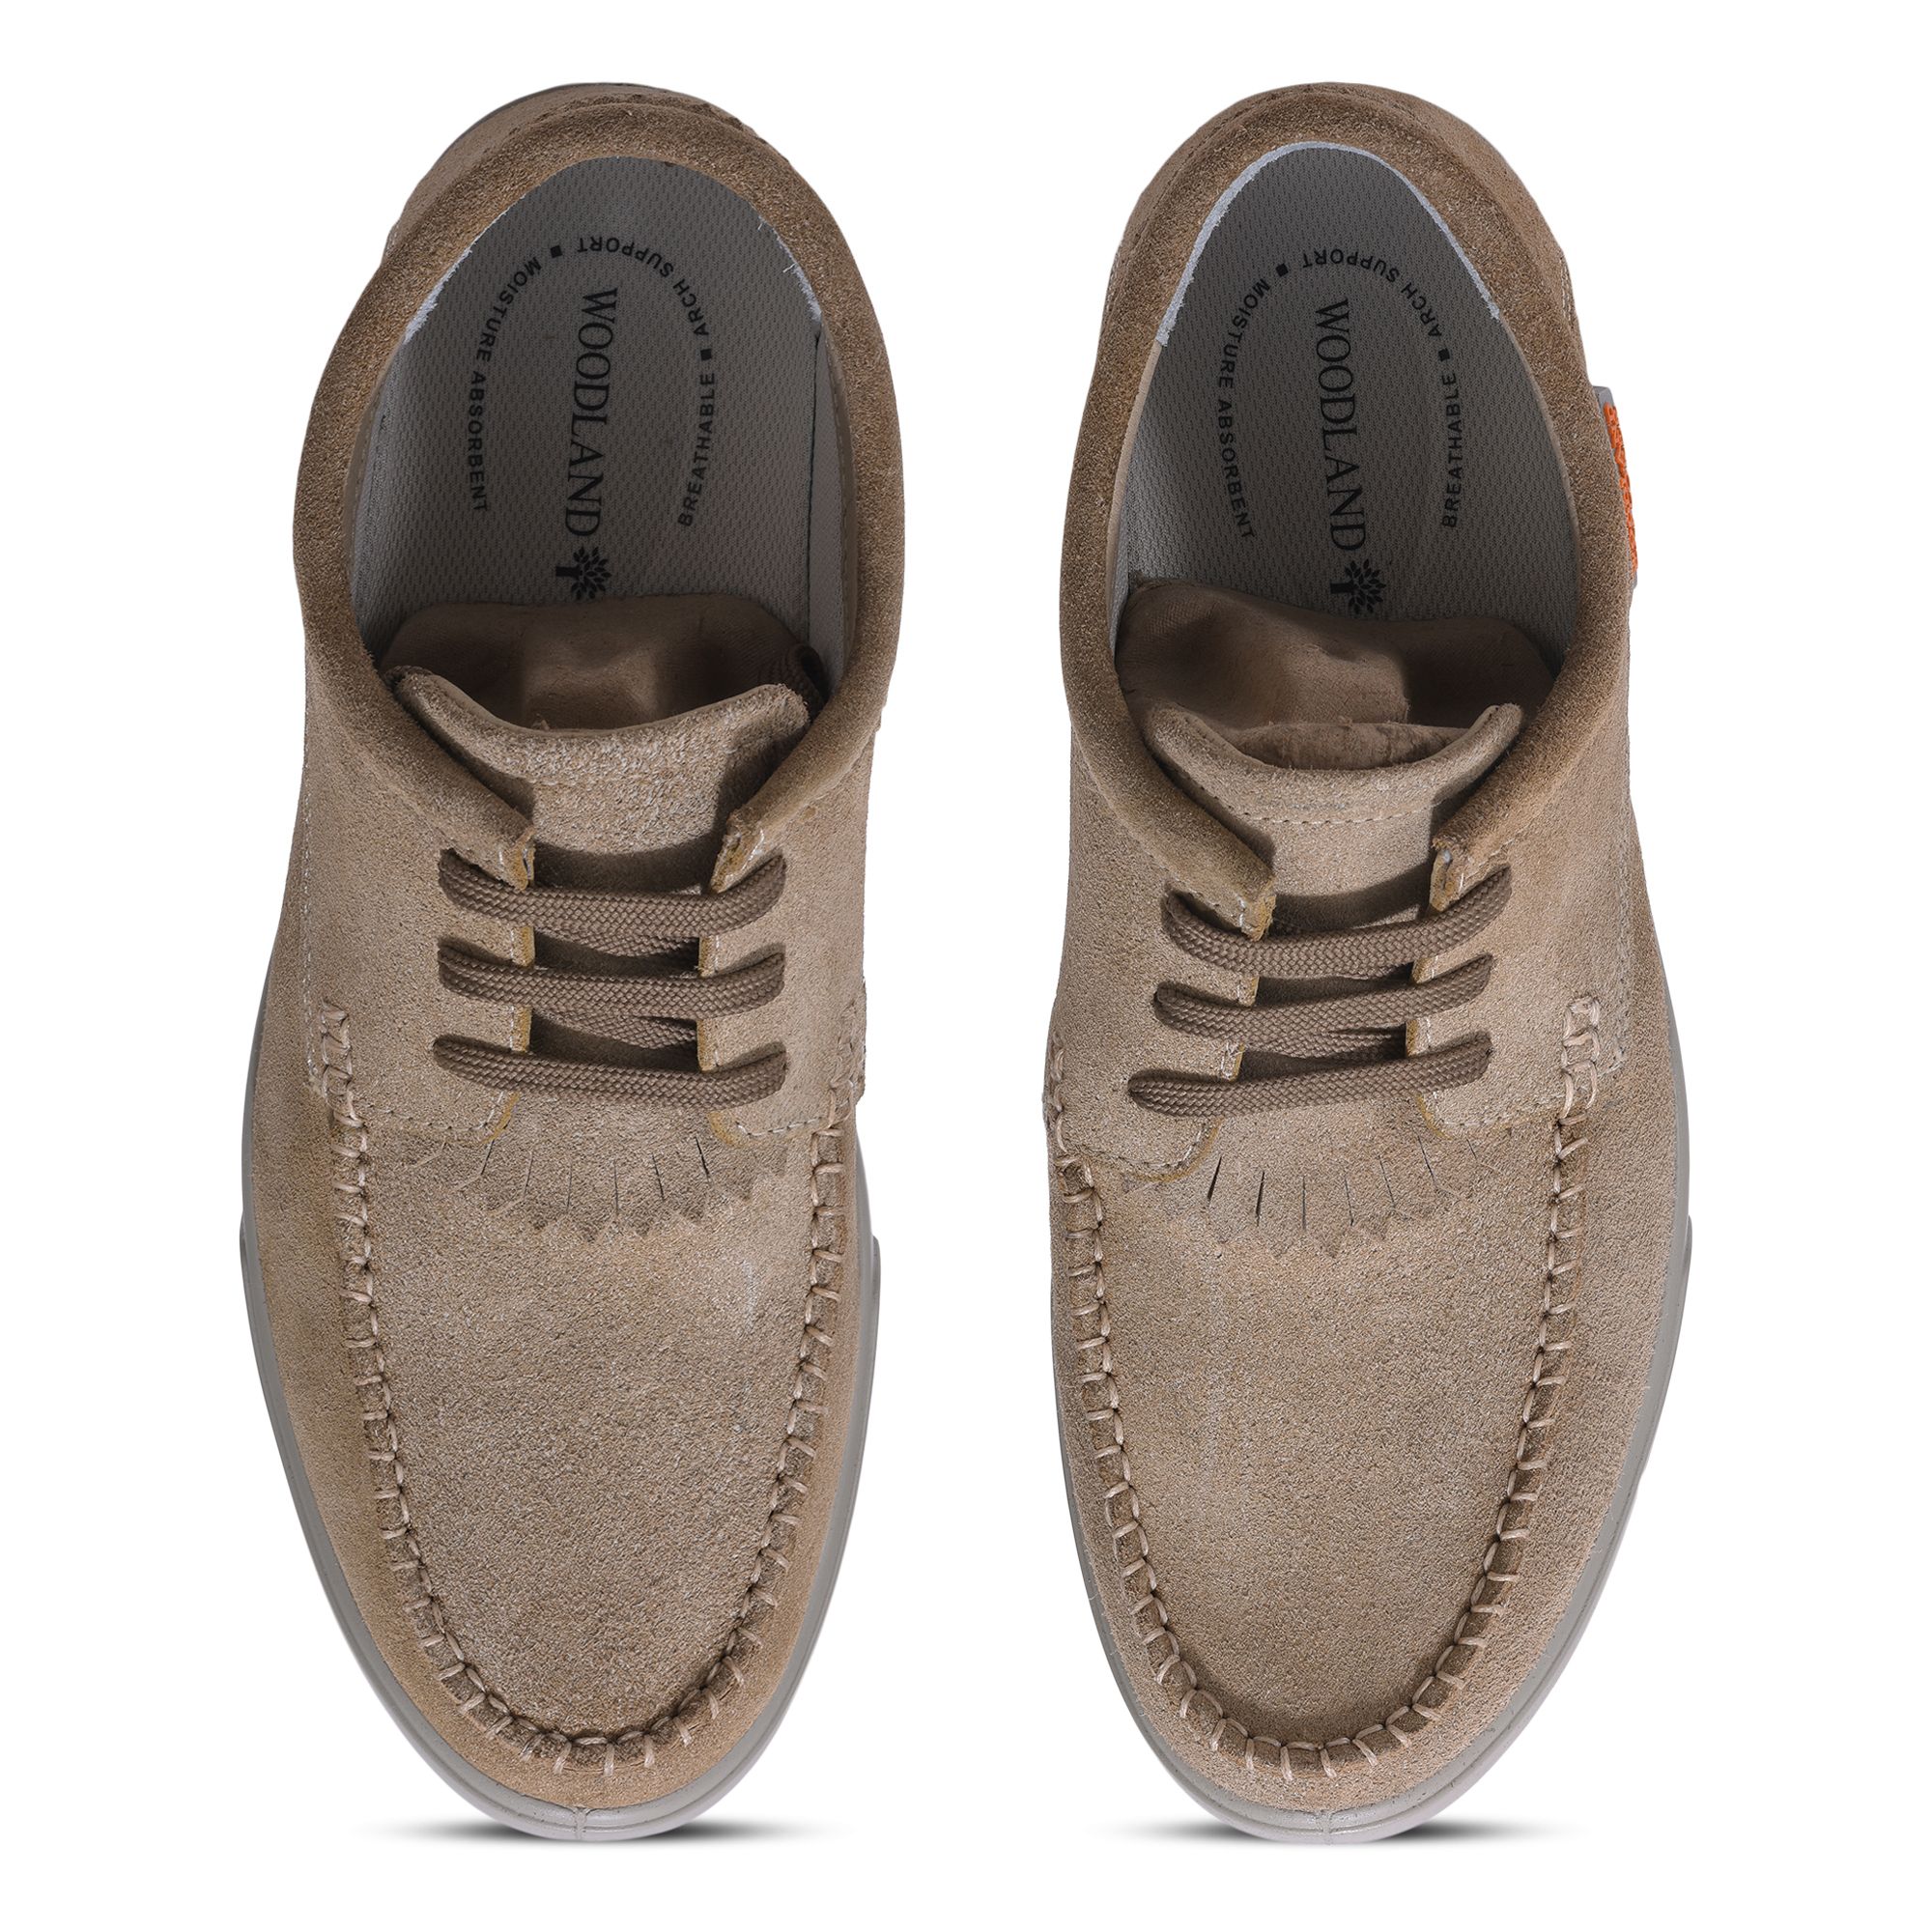 Gingembre casual boat shoes